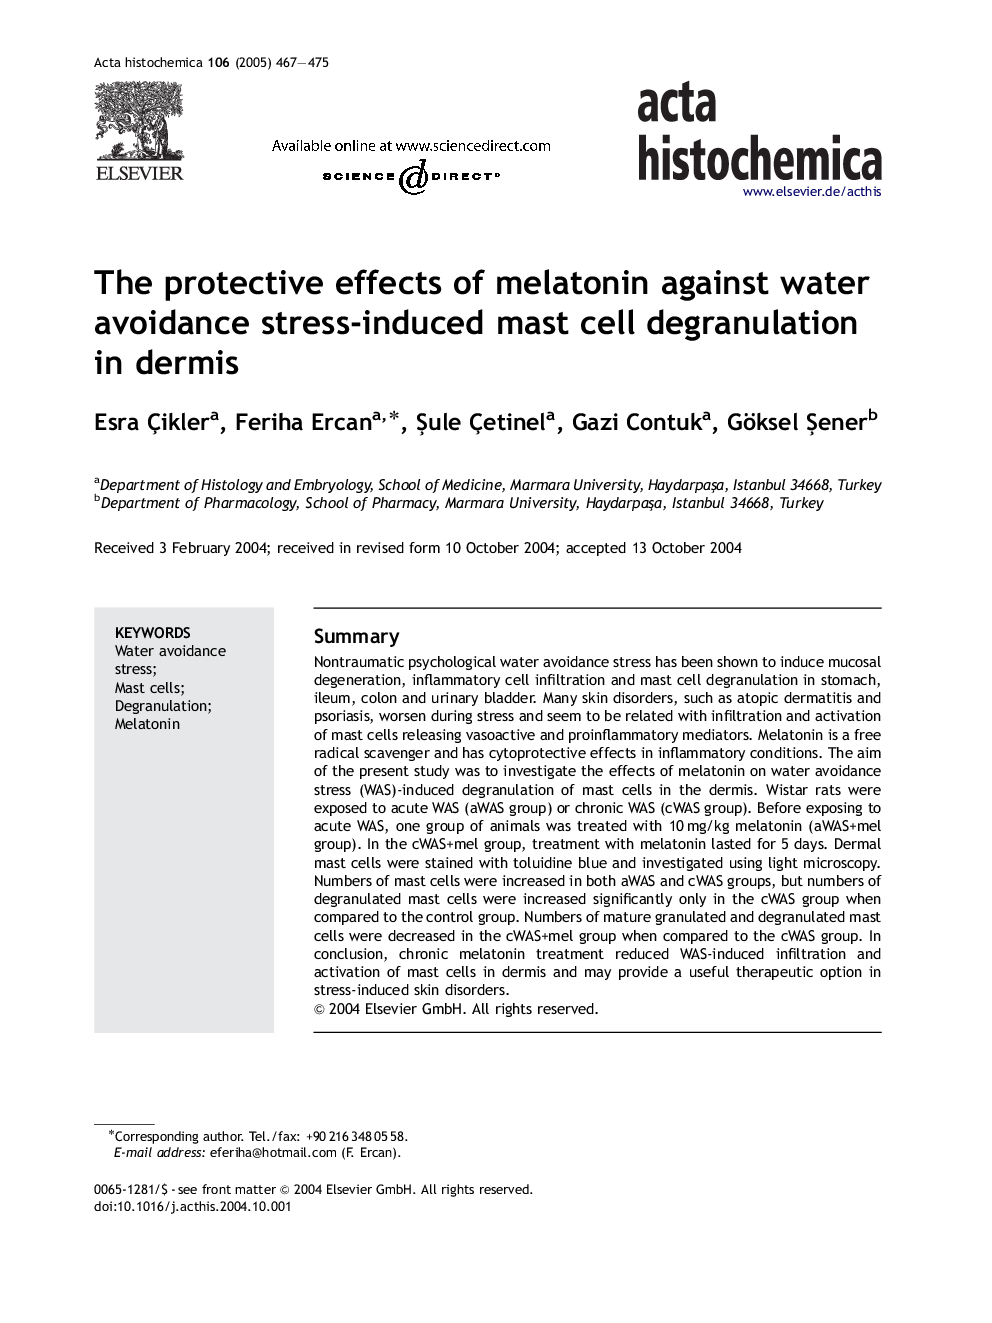 The protective effects of melatonin against water avoidance stress-induced mast cell degranulation in dermis